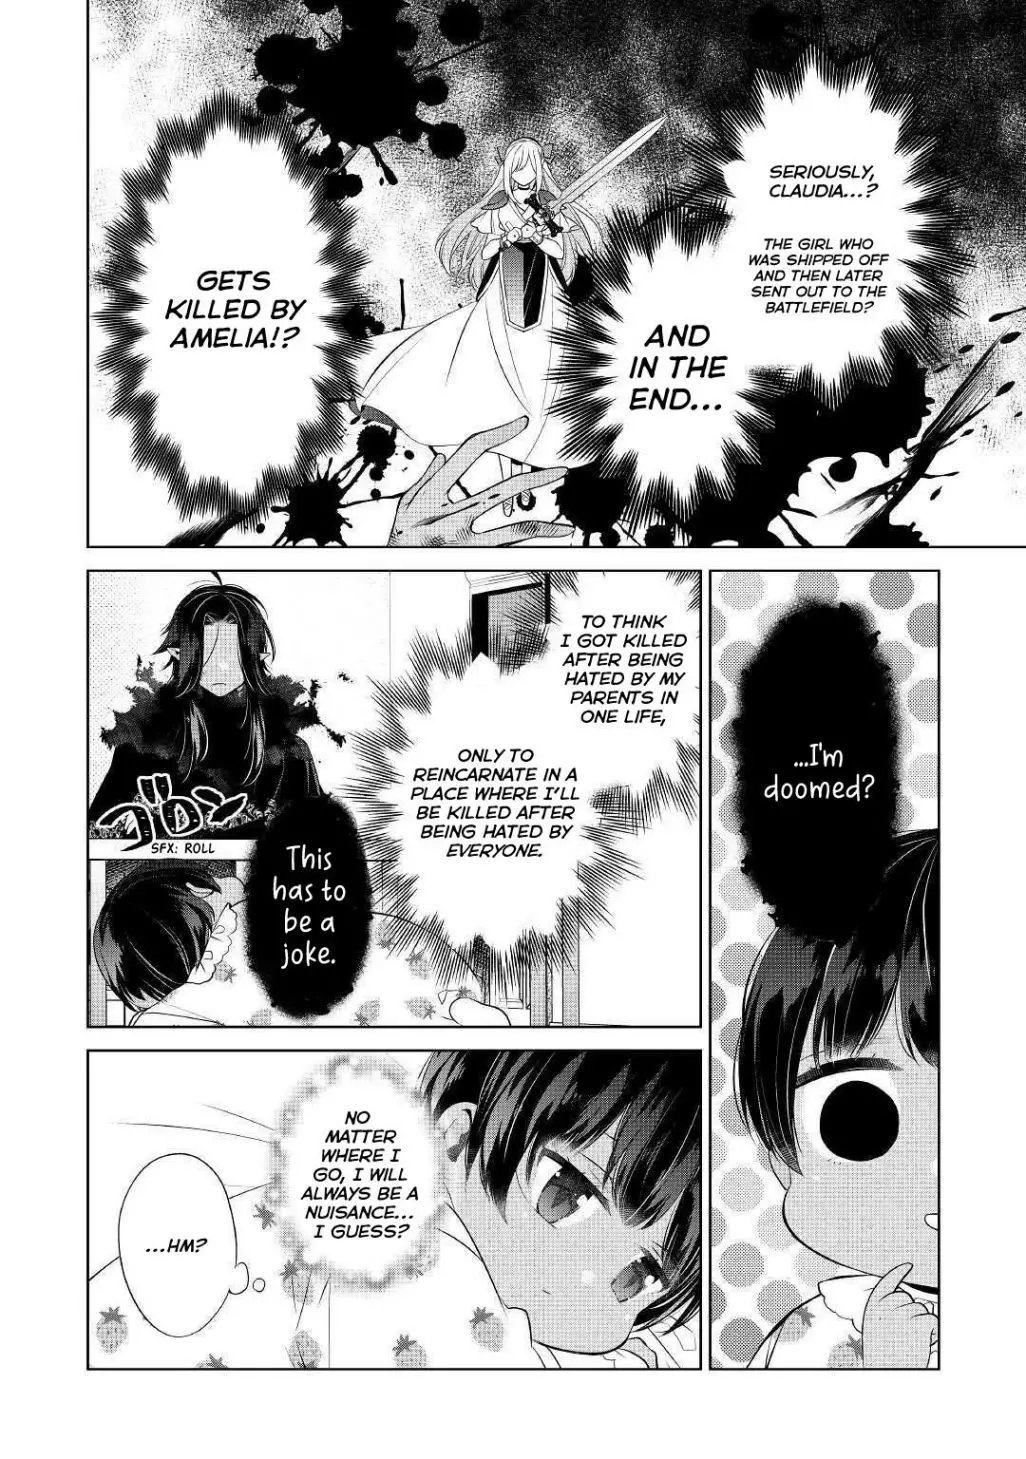 I'm Not a Villainess!! Just Because I Can Control Darkness Doesn’t Mean I’m a Bad Person! - 1 page 16